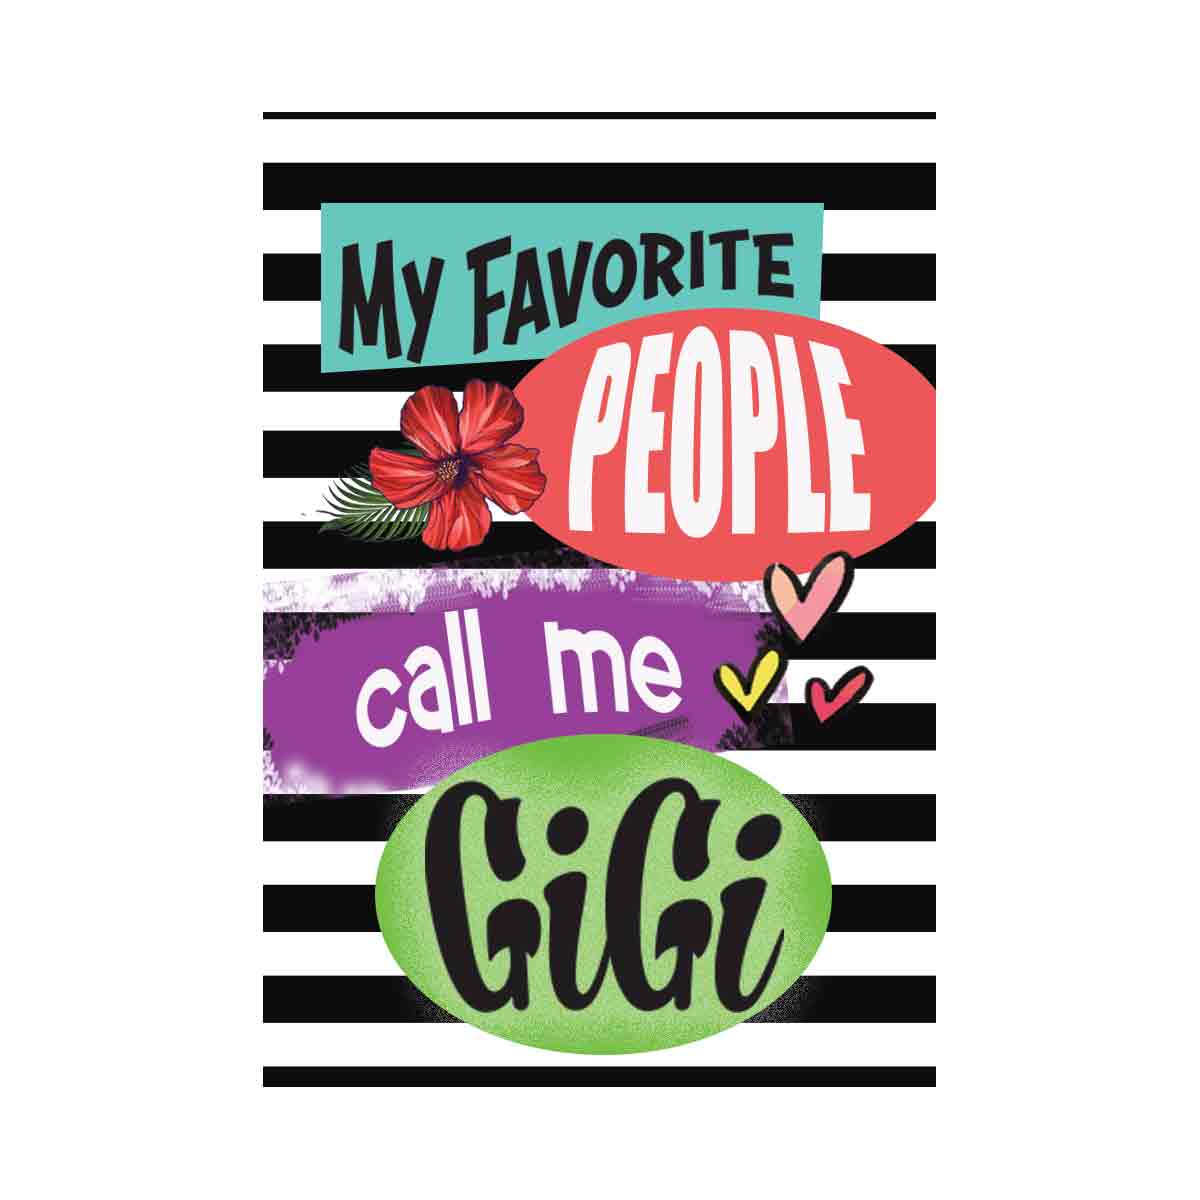 My favorite people - Gigi (customize on request)